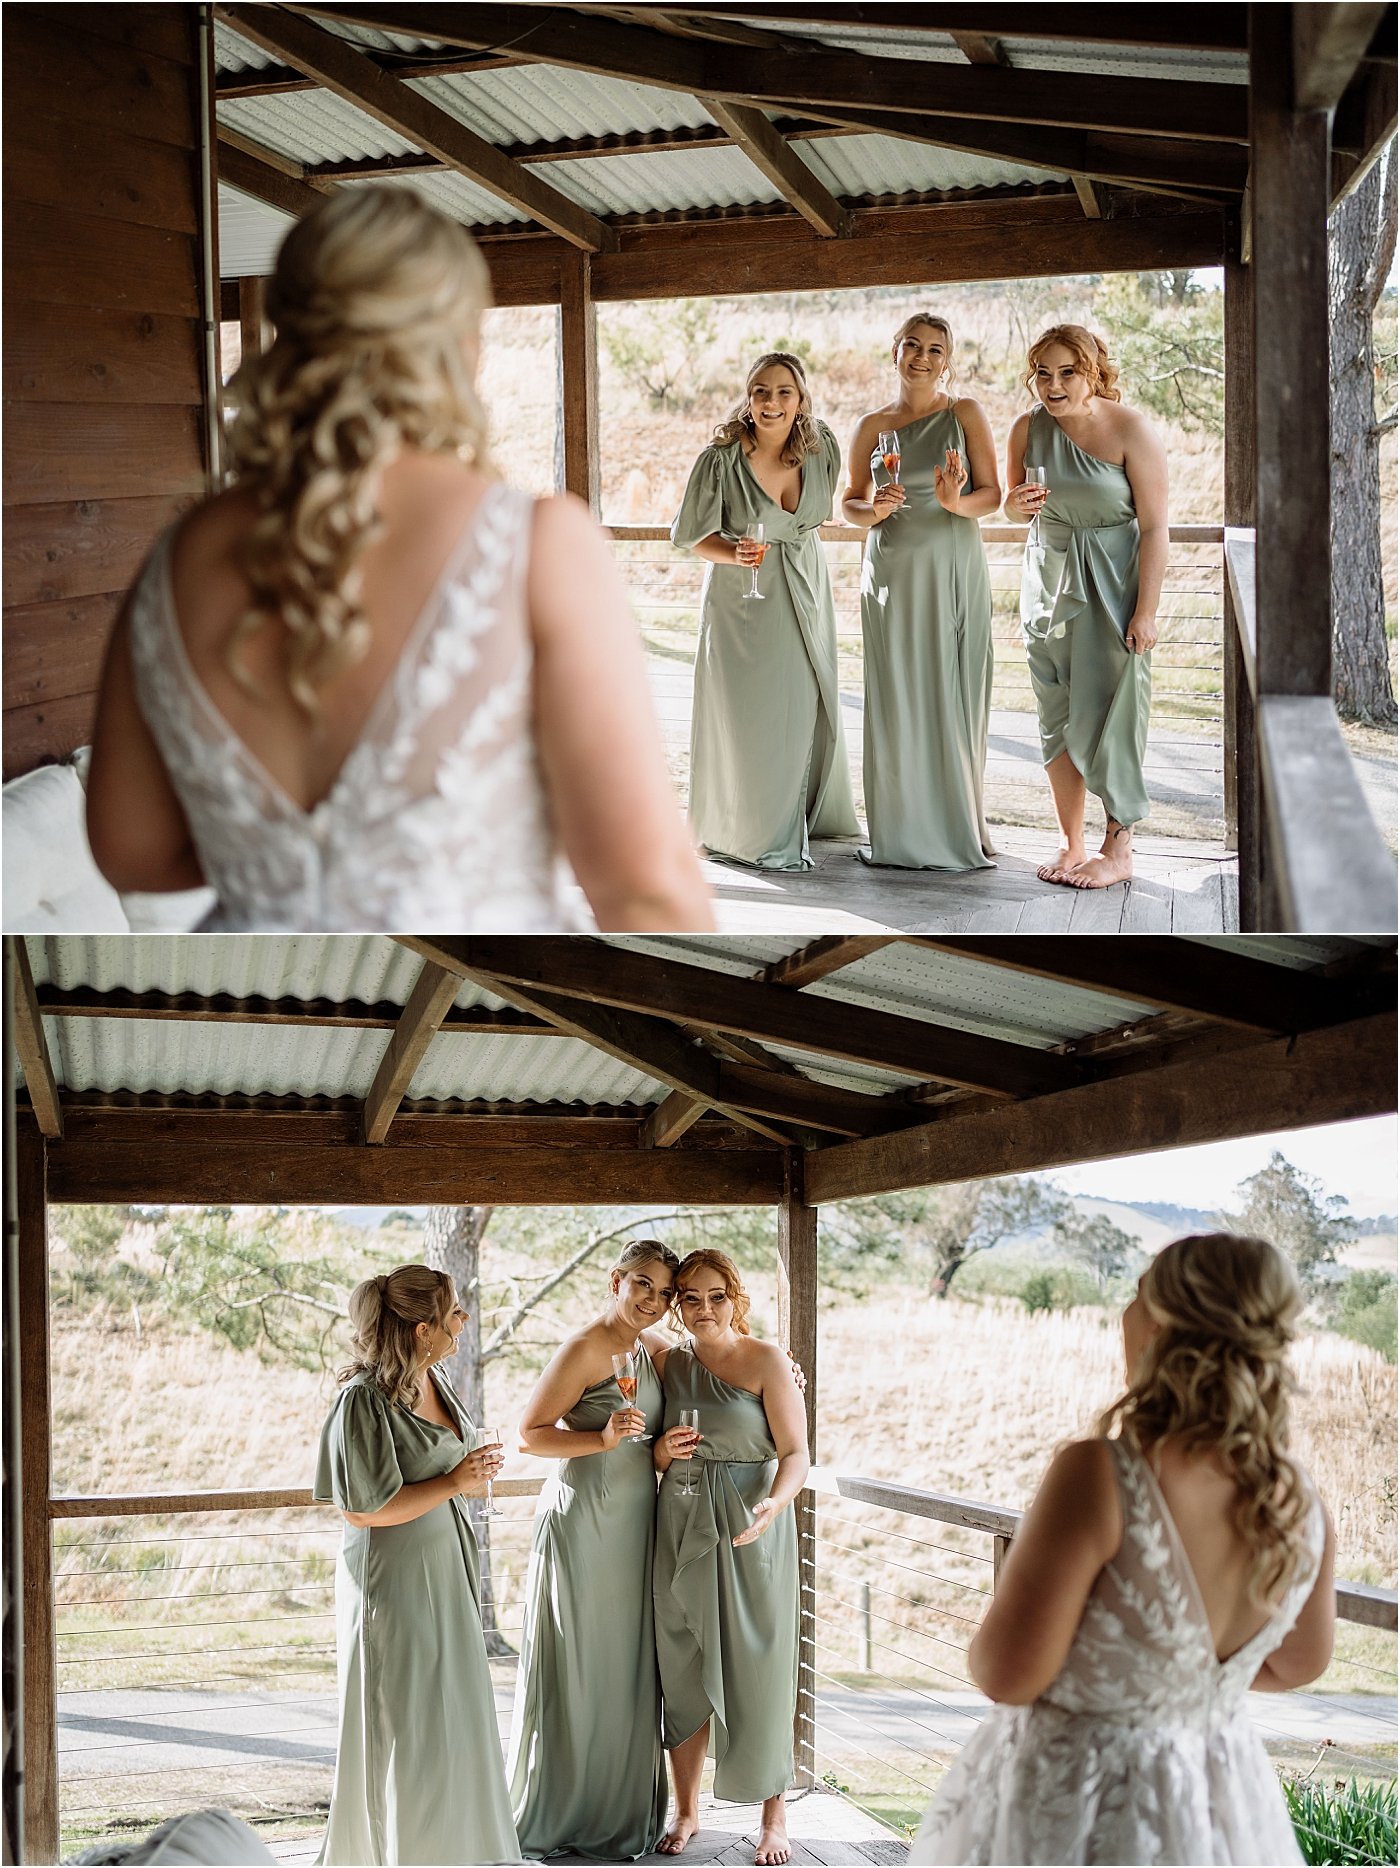 Bridesmaids first look at bride in wedding gown at Riverwood Downs